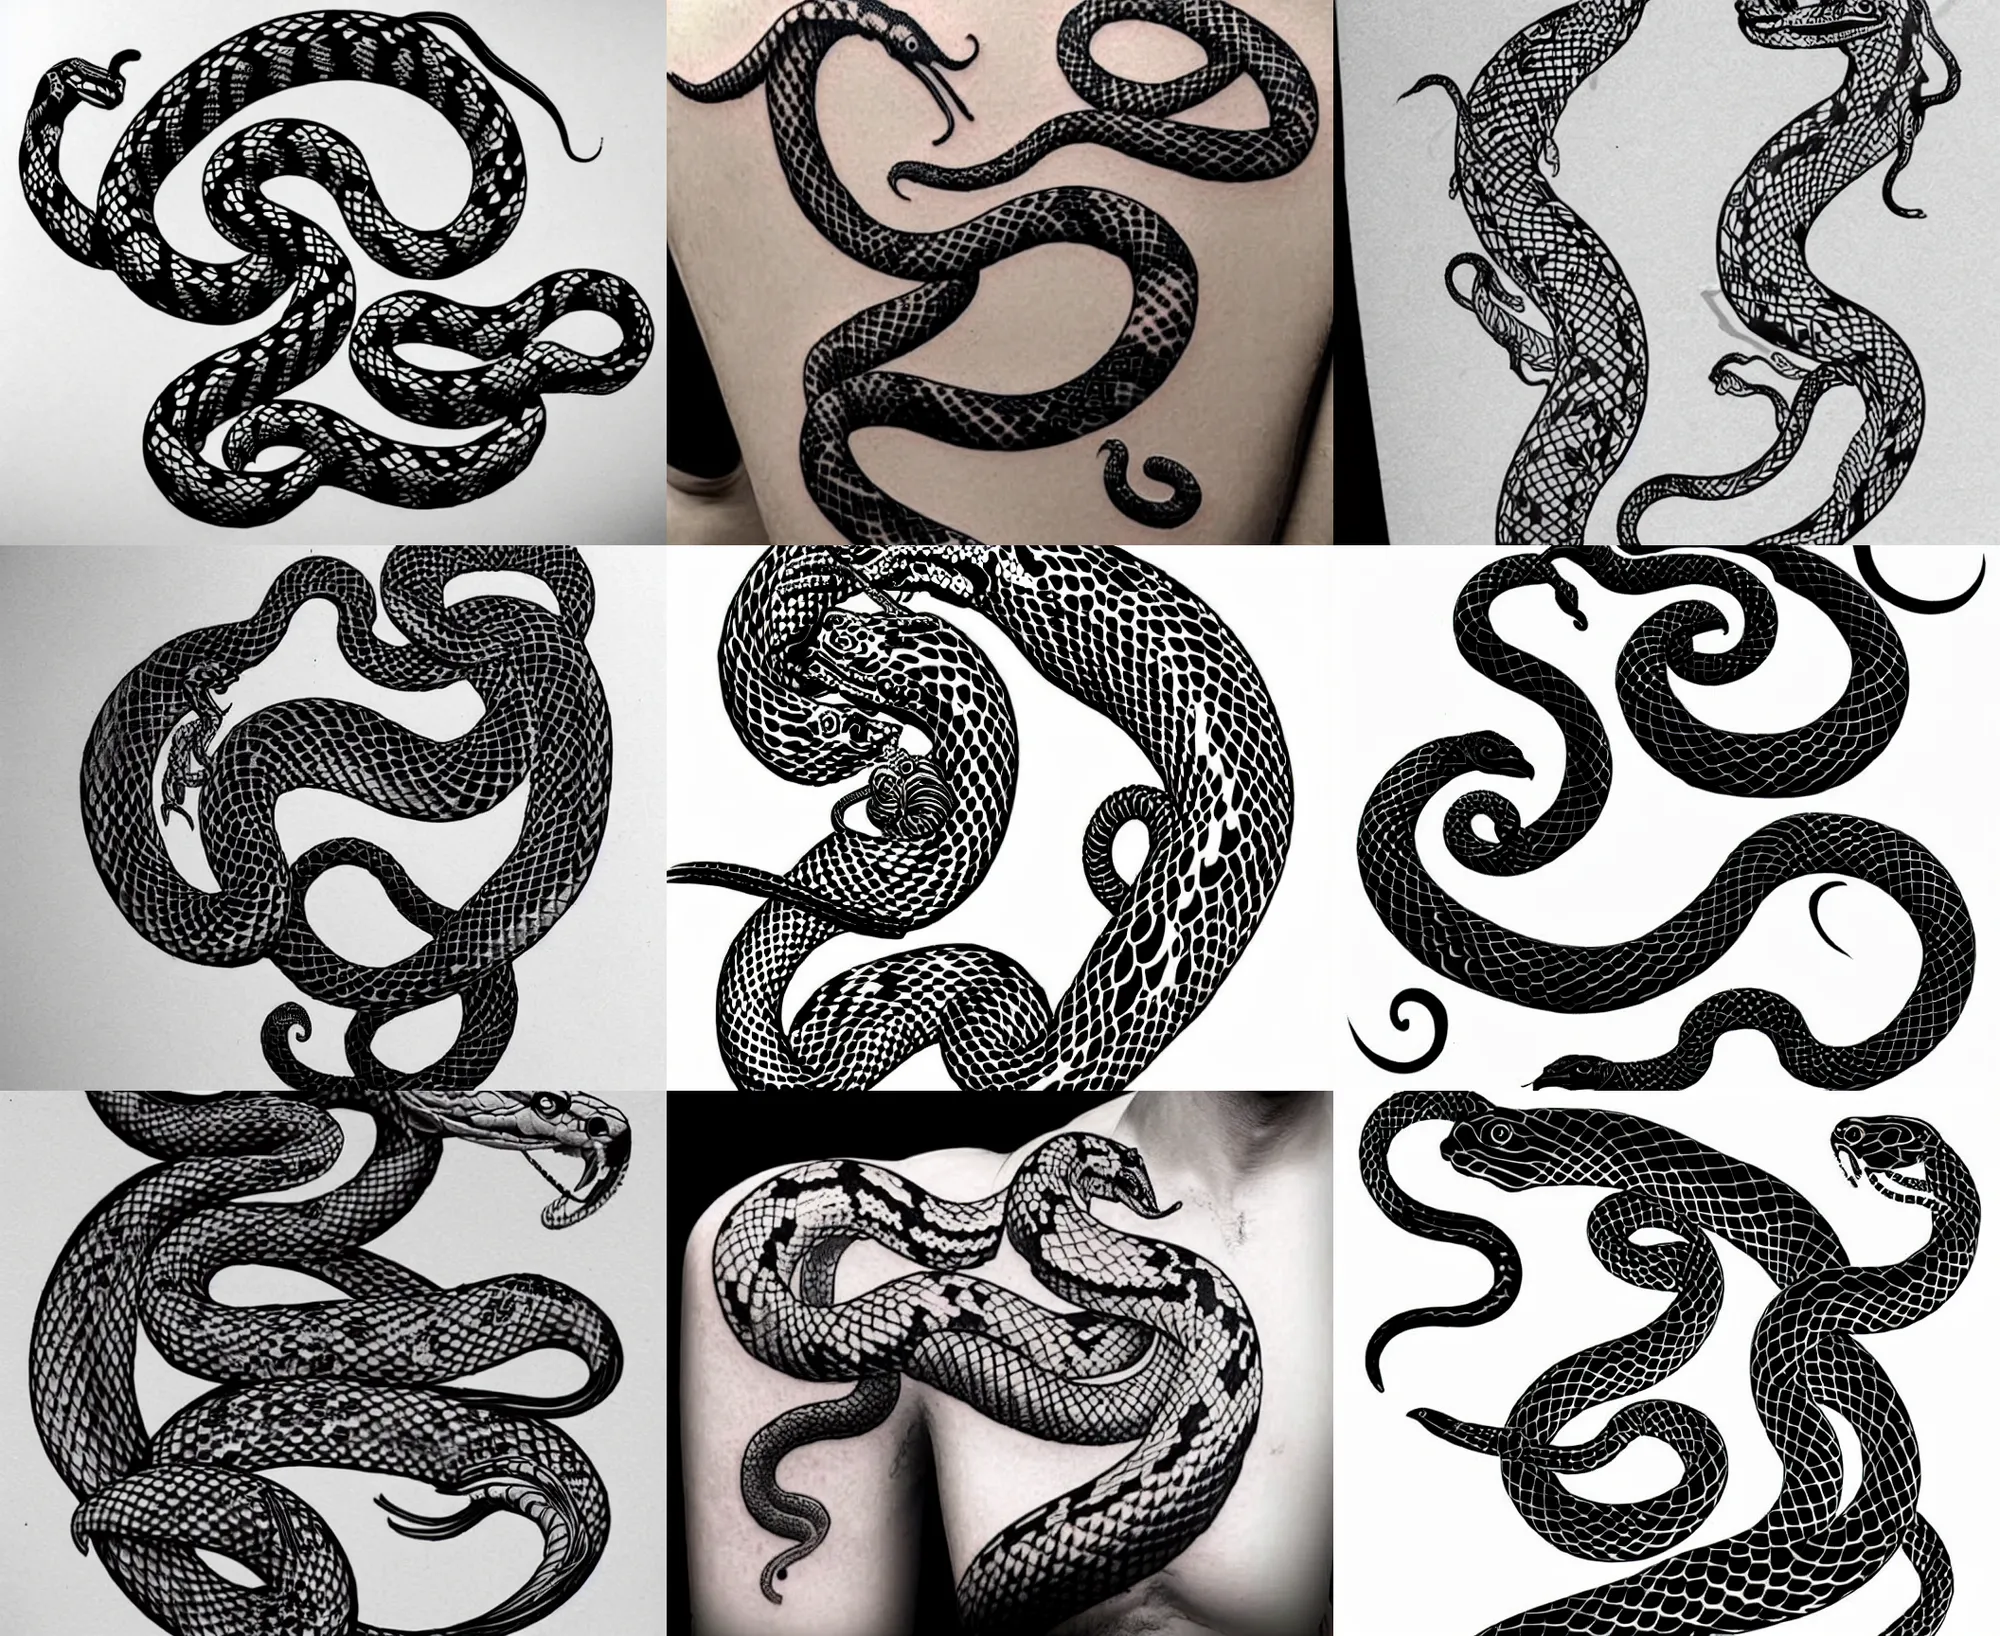 215+ King Cobra Tattoo Ideas - Express the Dual Side of Good and Evil